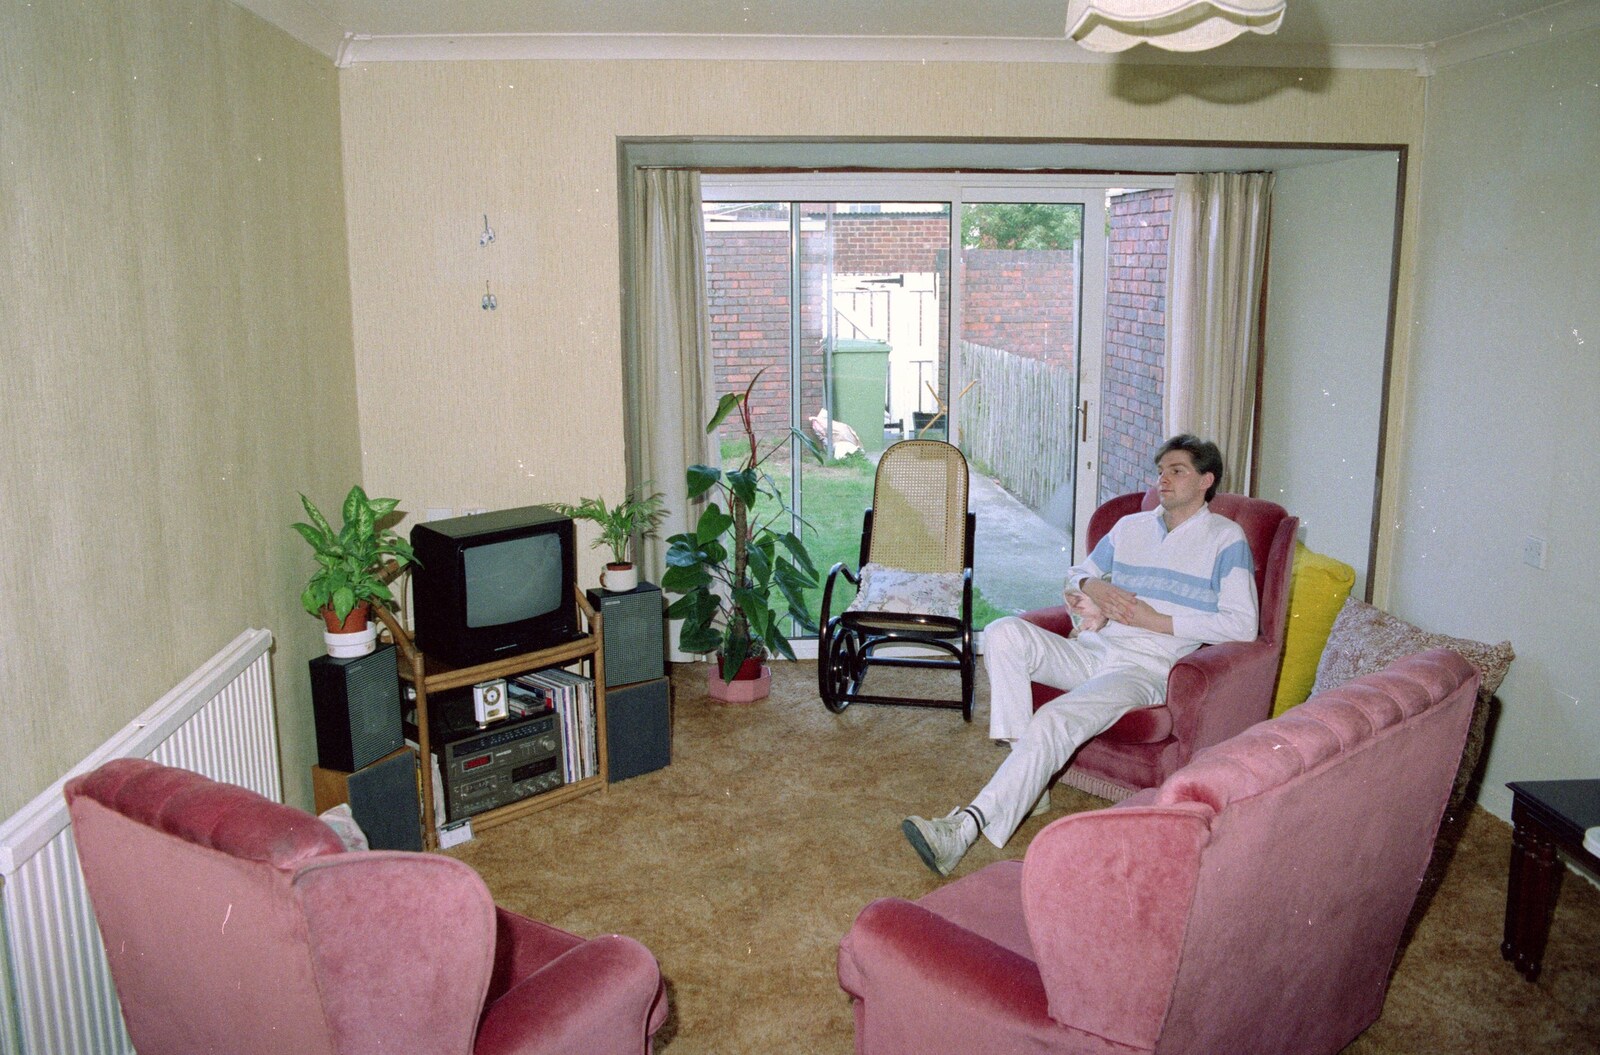 Sean in his lounge from Visiting Sean and Farnborough Airshow, Hampshire - 15th July 1988